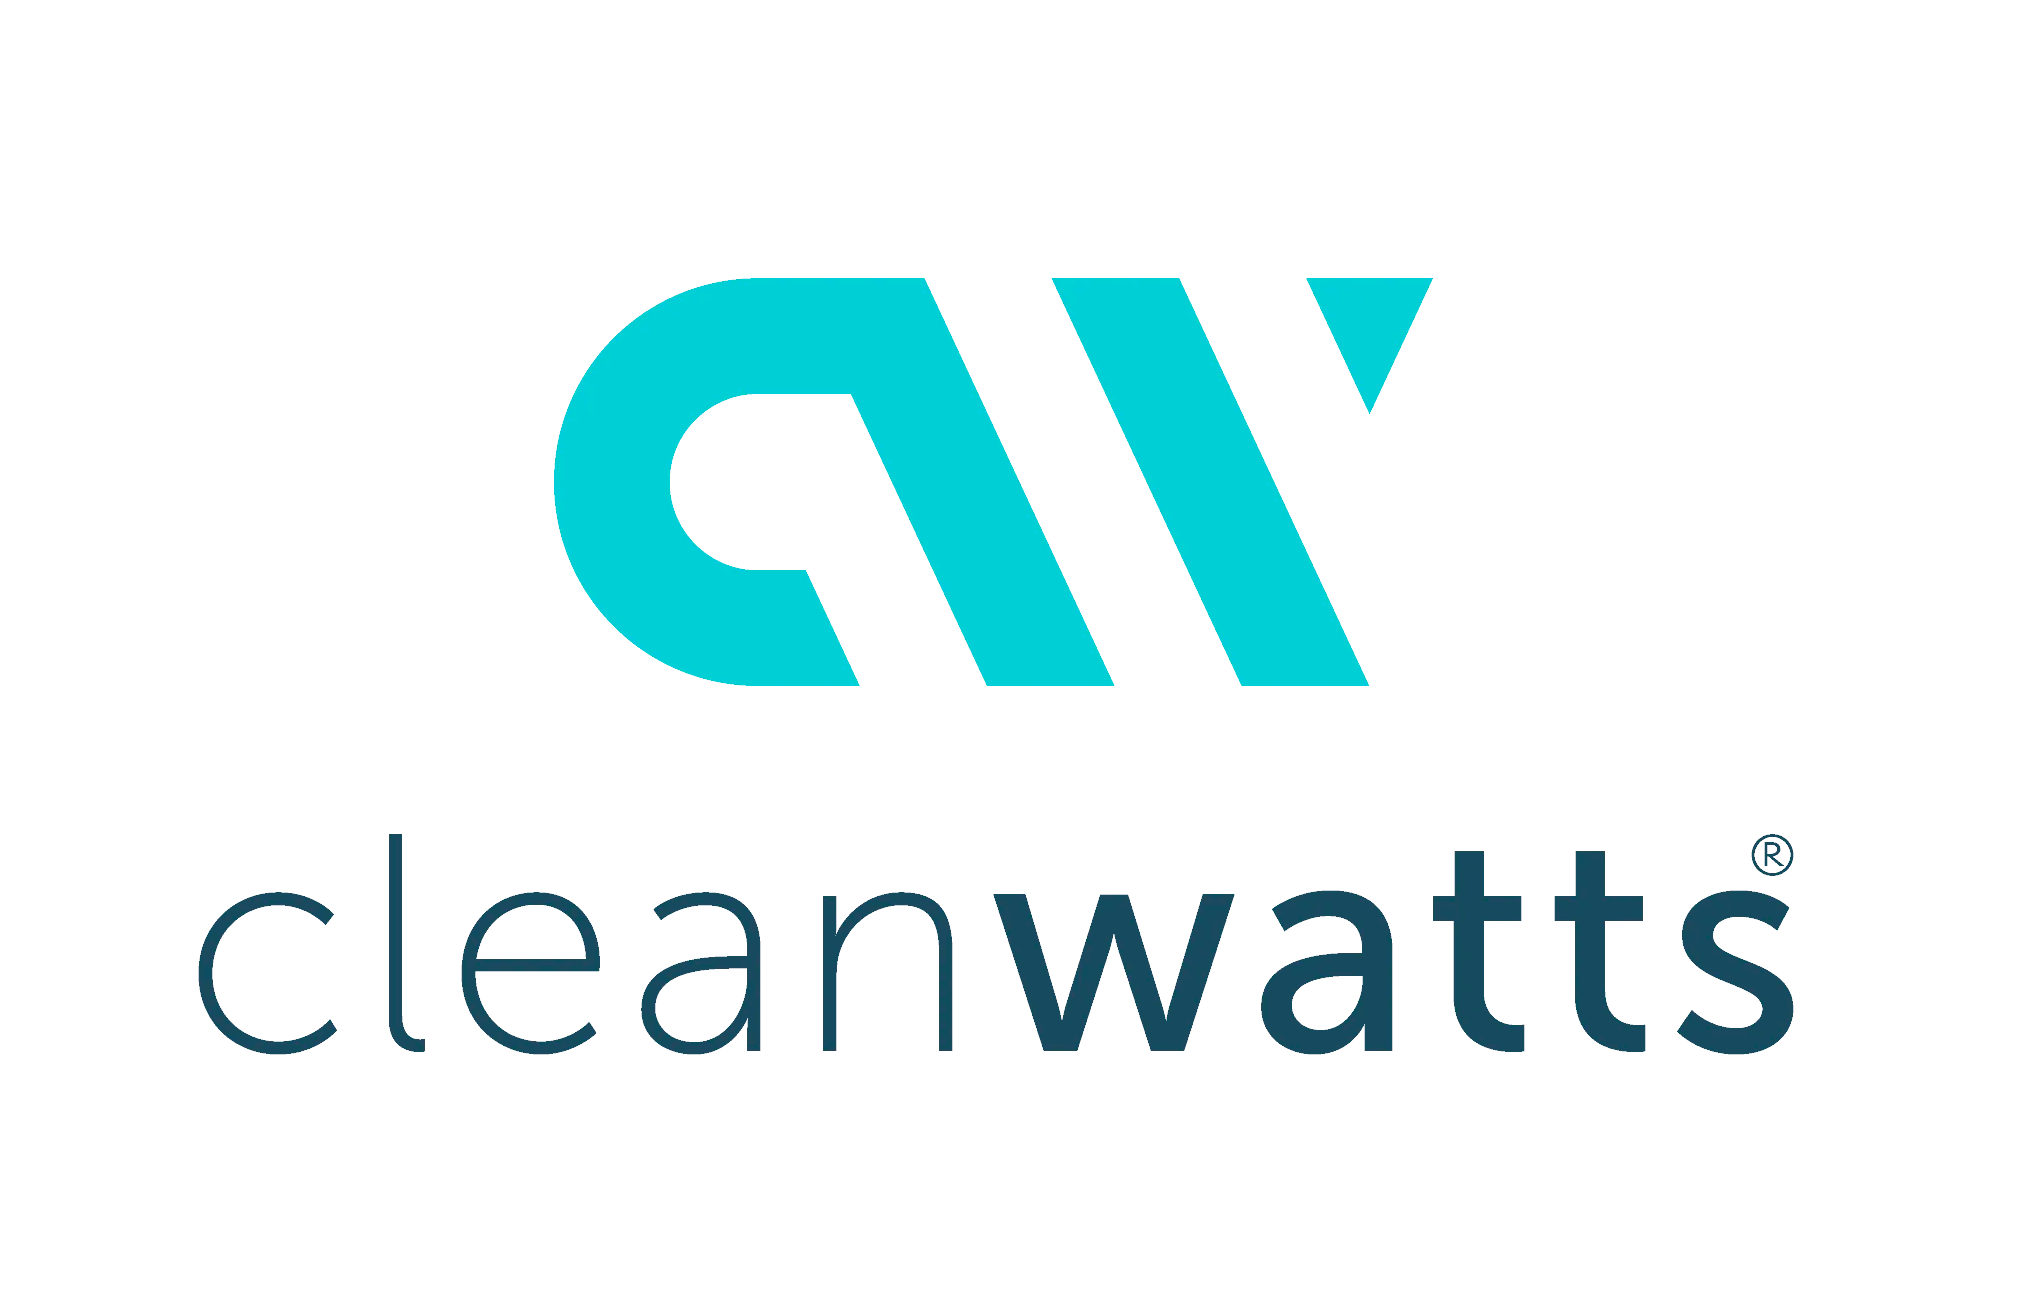 Cleanwatts